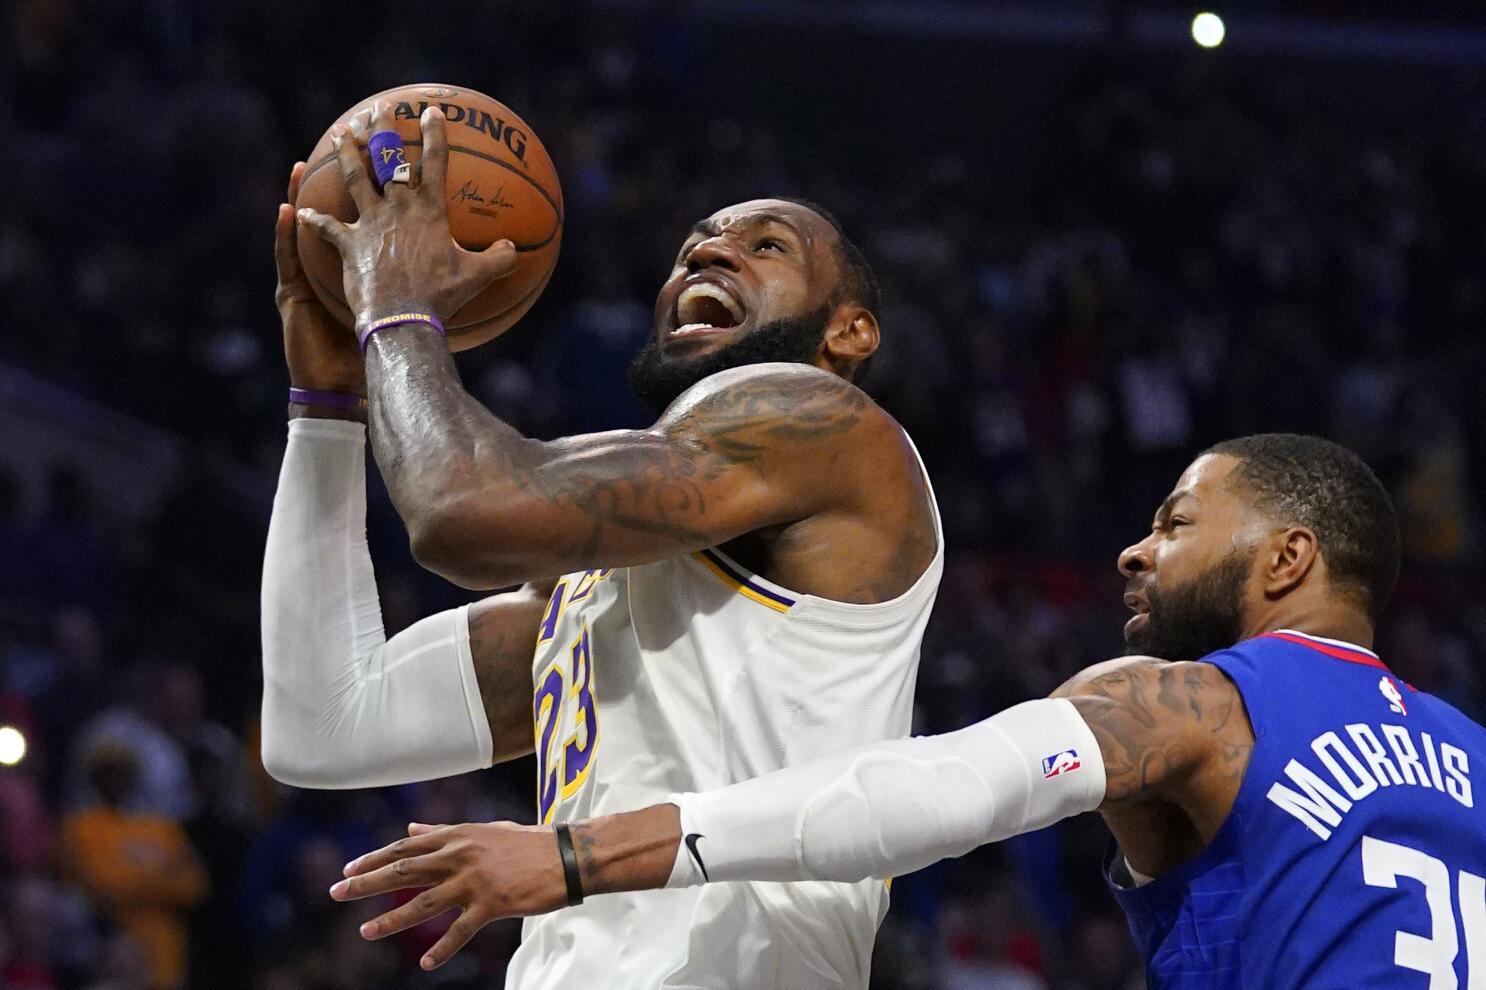 LeBron James keeps showing off his 'MVP' qualities for Lakers